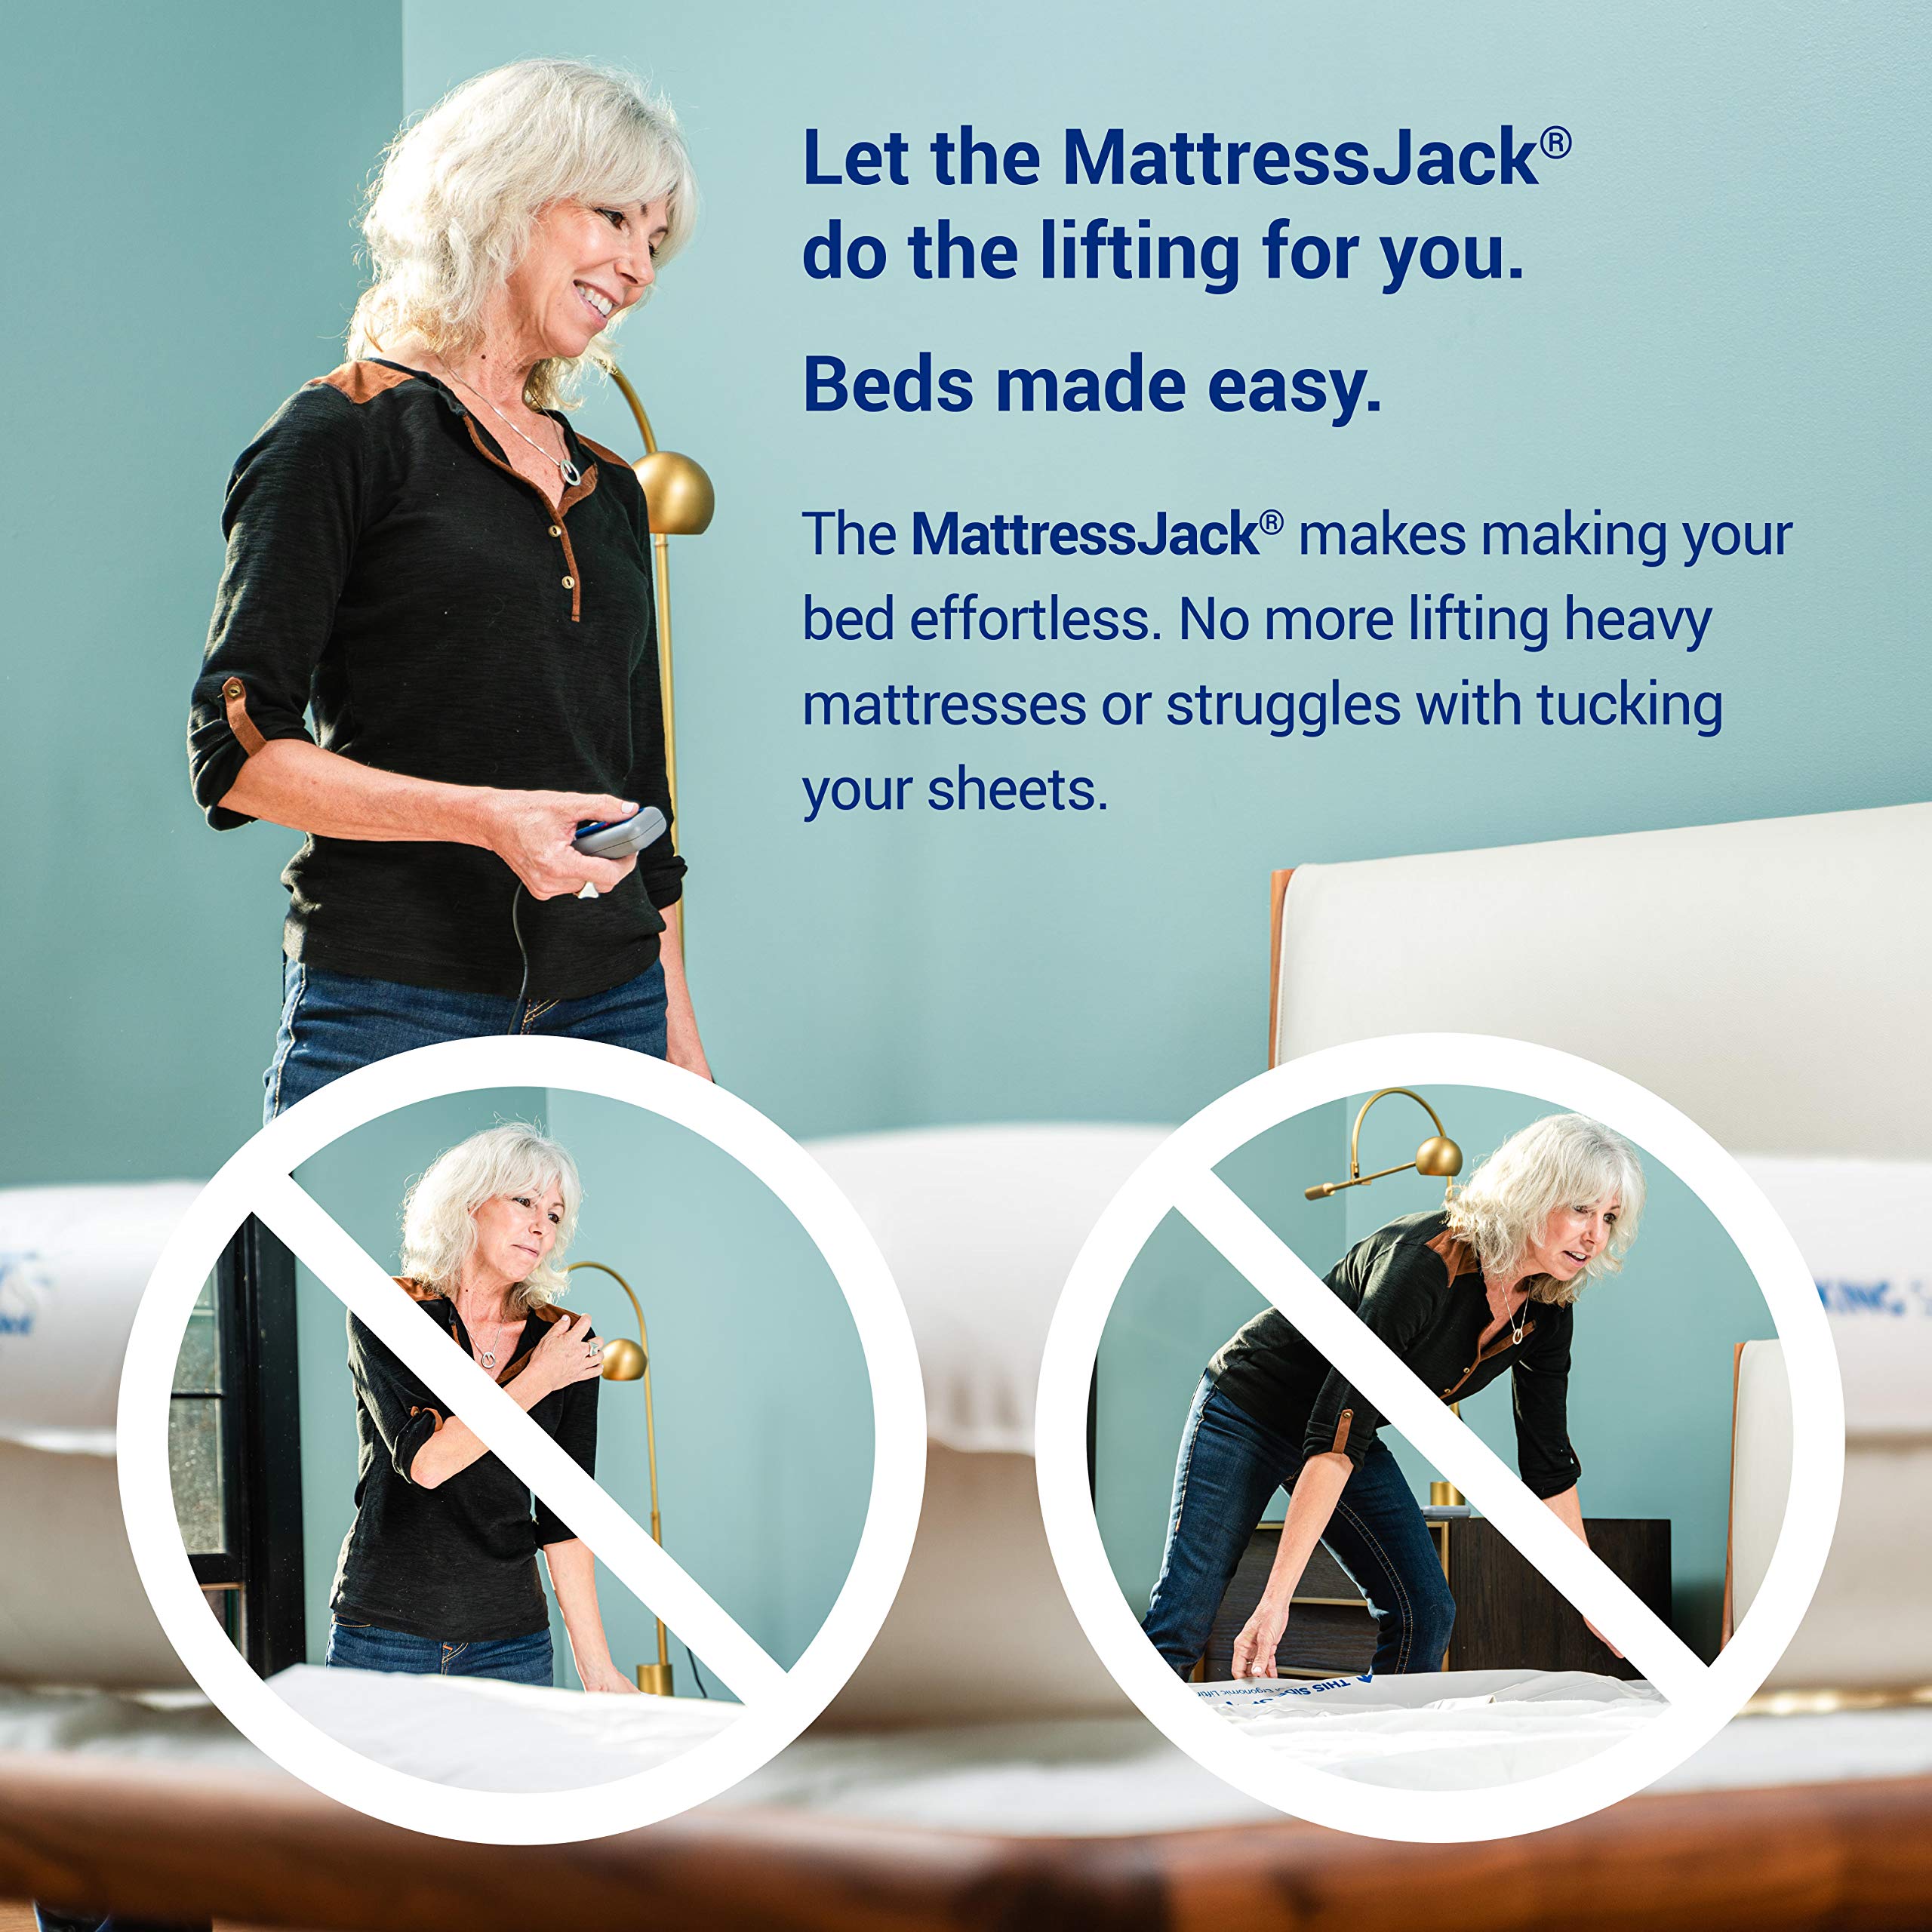 Mattress Jack Mattress Elevator - Easy Use Lifter for Sheet Tucking & Bed Making - Ergonomic Mobility & Daily Living Aid for Elderly, with Inflatable Ring, Air Pump, & Switch, Queen